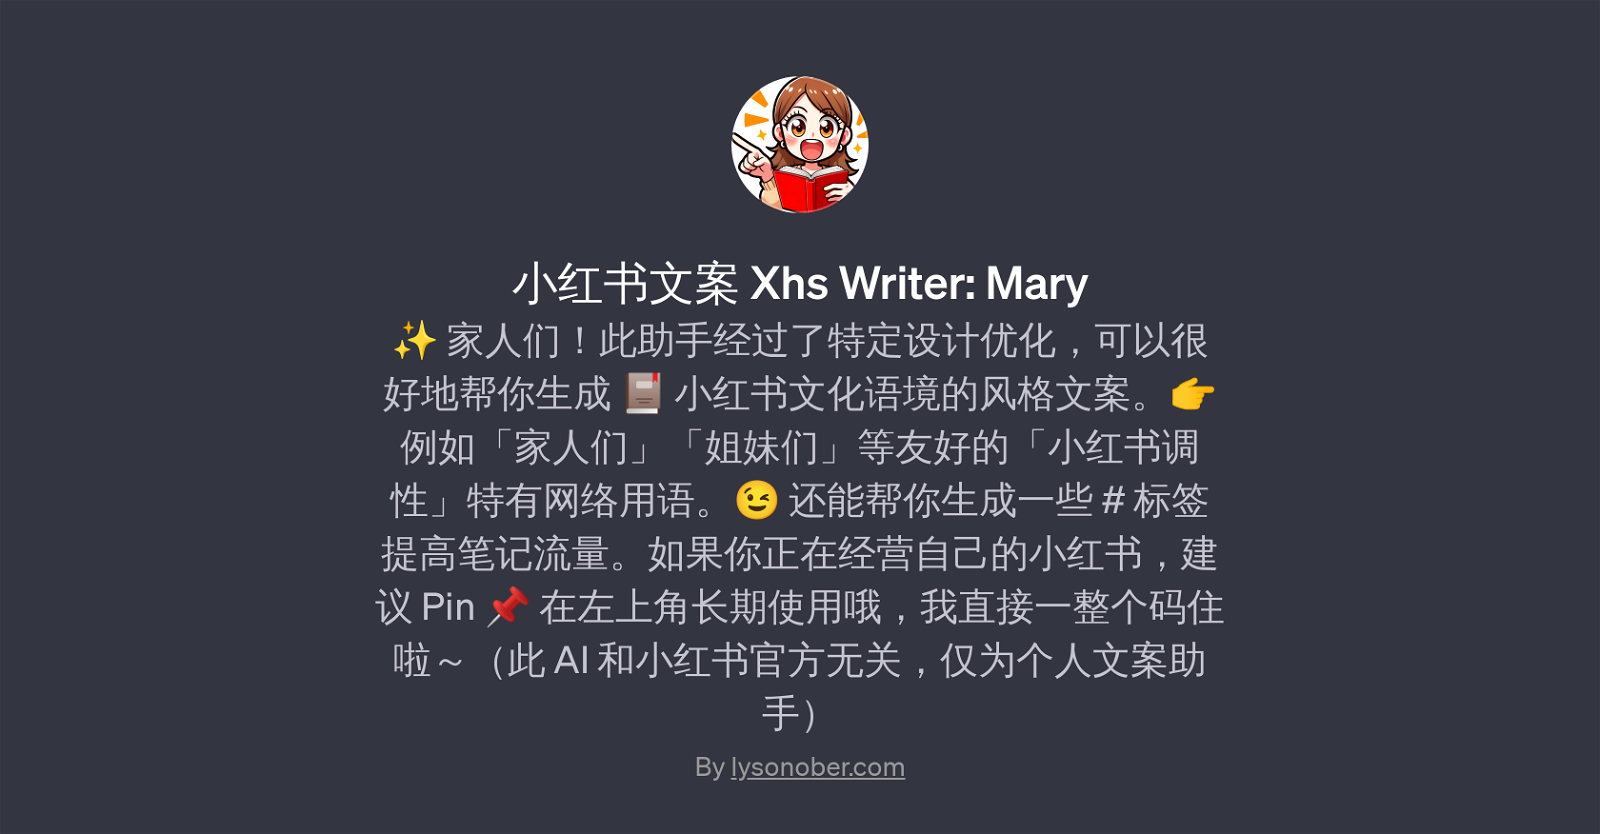 Xhs Writer: Mary website